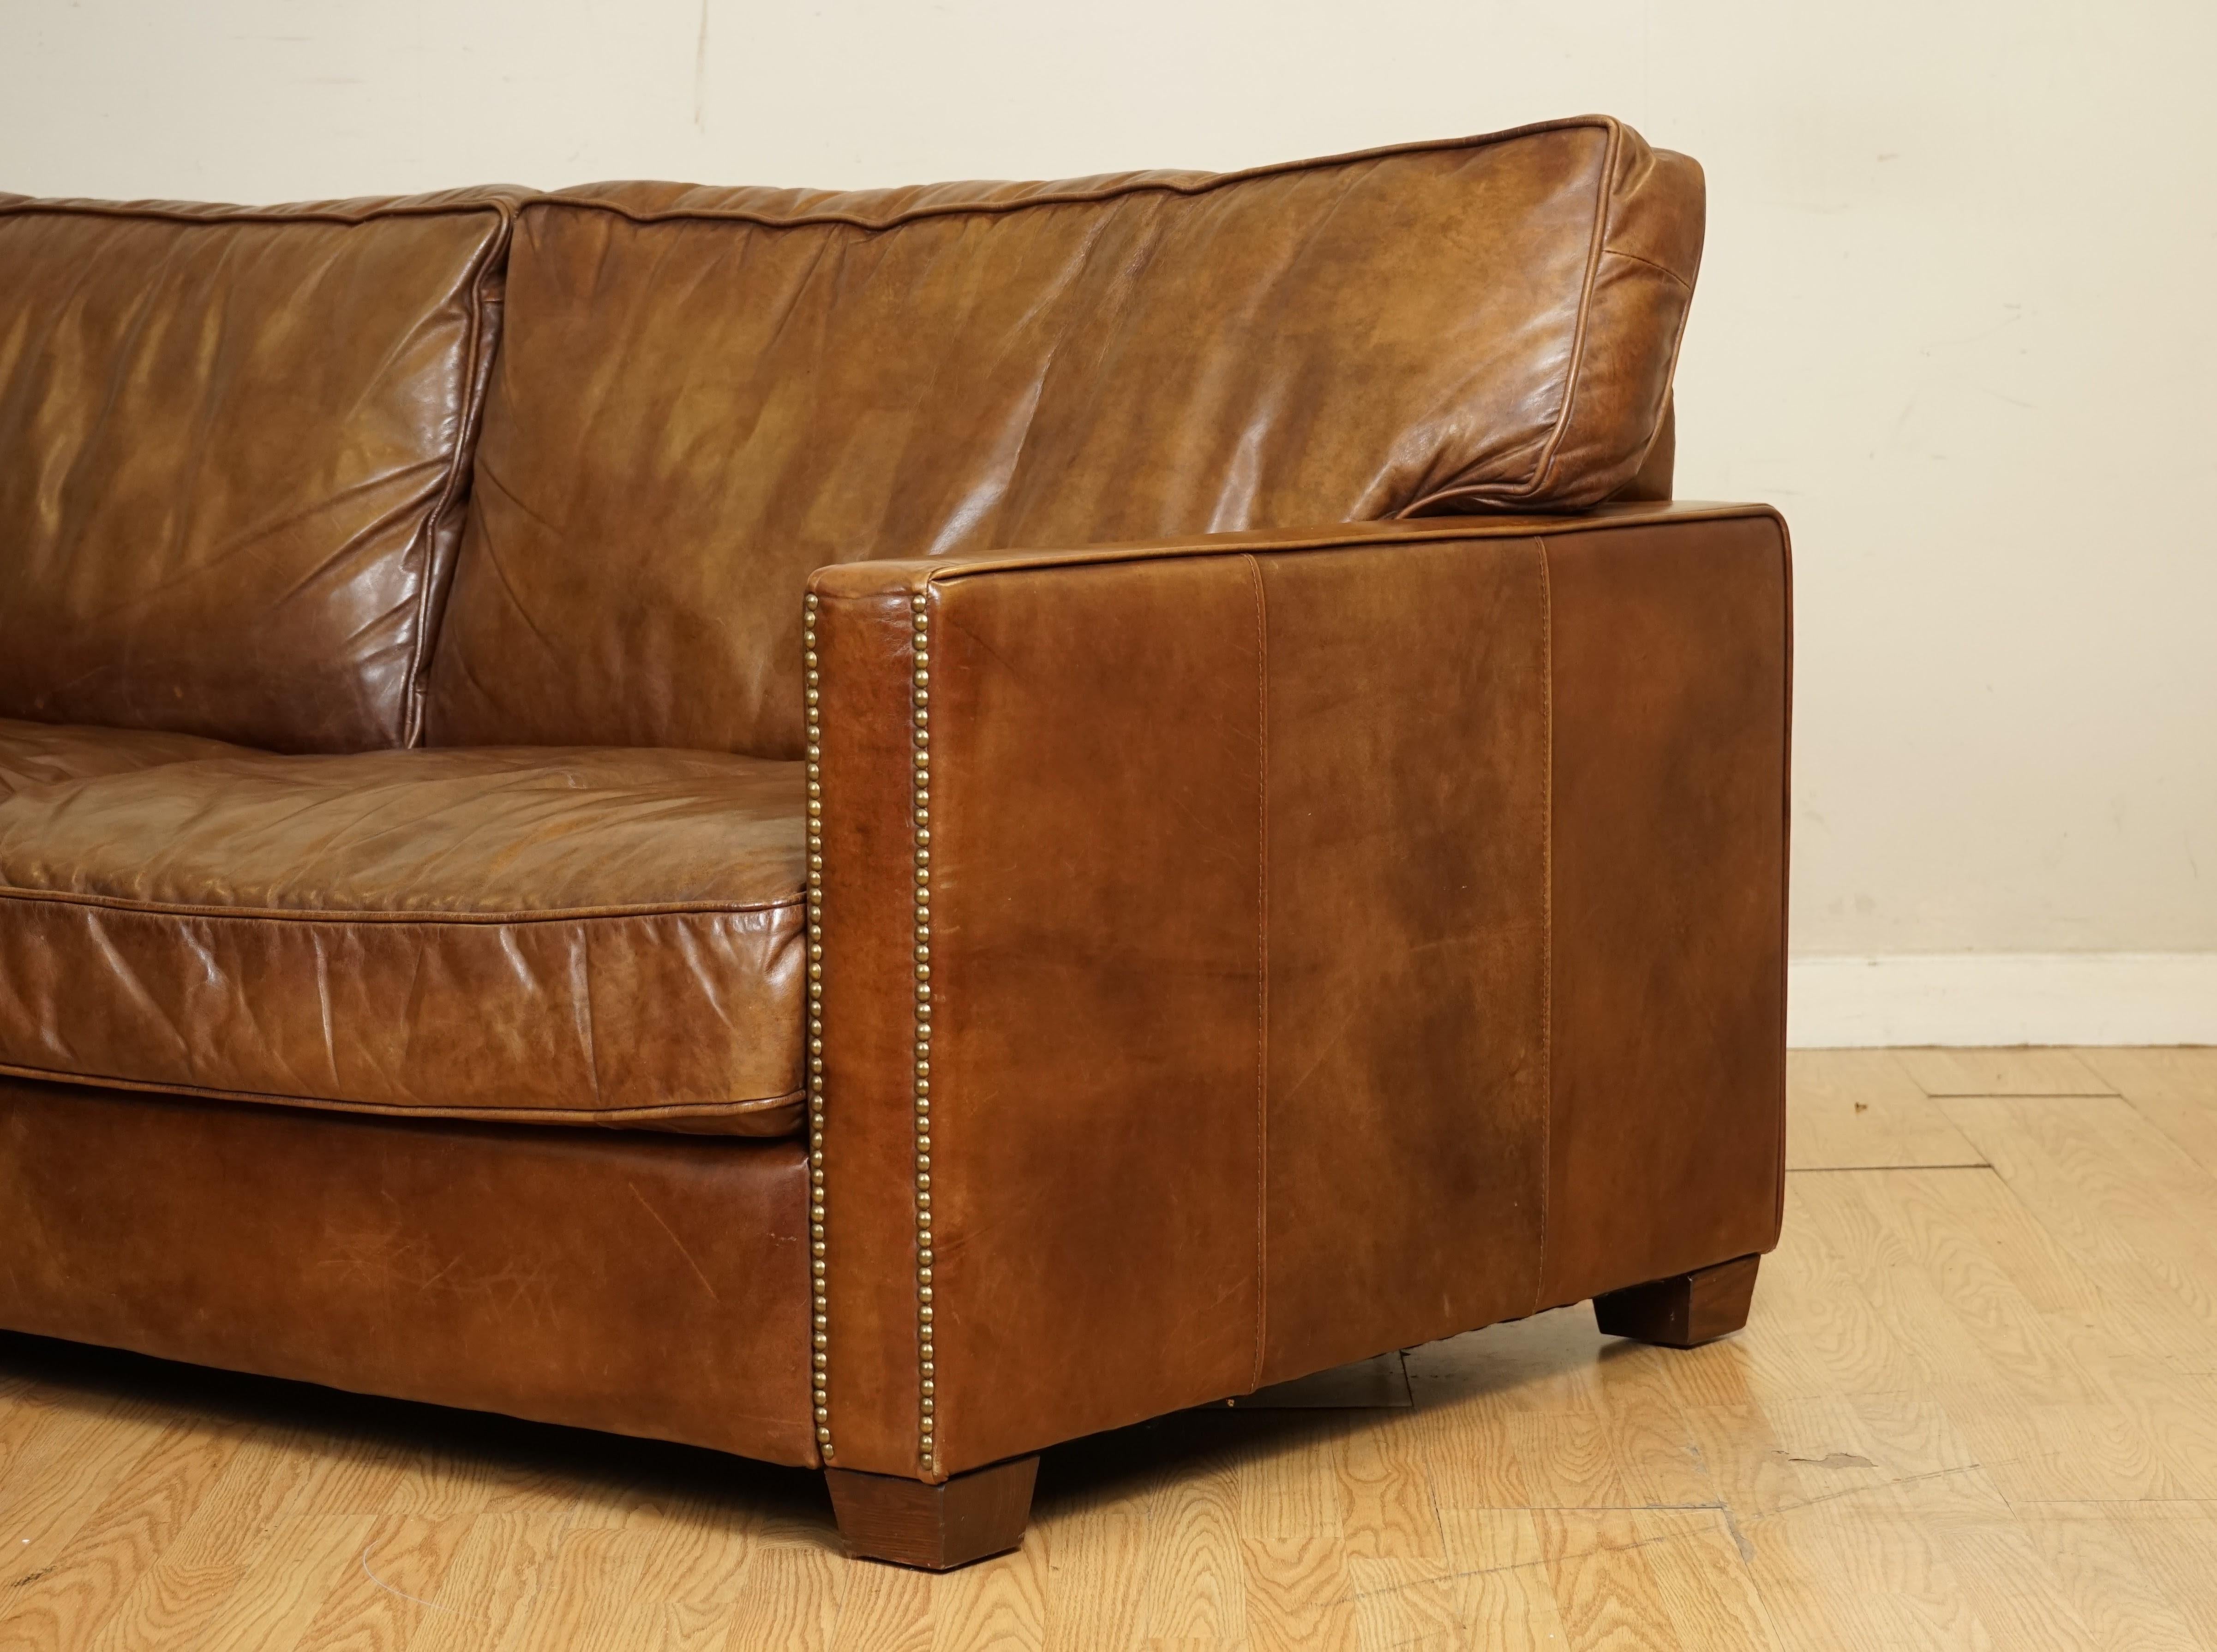 Hand-Crafted Gorgeous Timothy Oulton Viscount Old Sadle Nut Brown Leather Three Seater Sofa